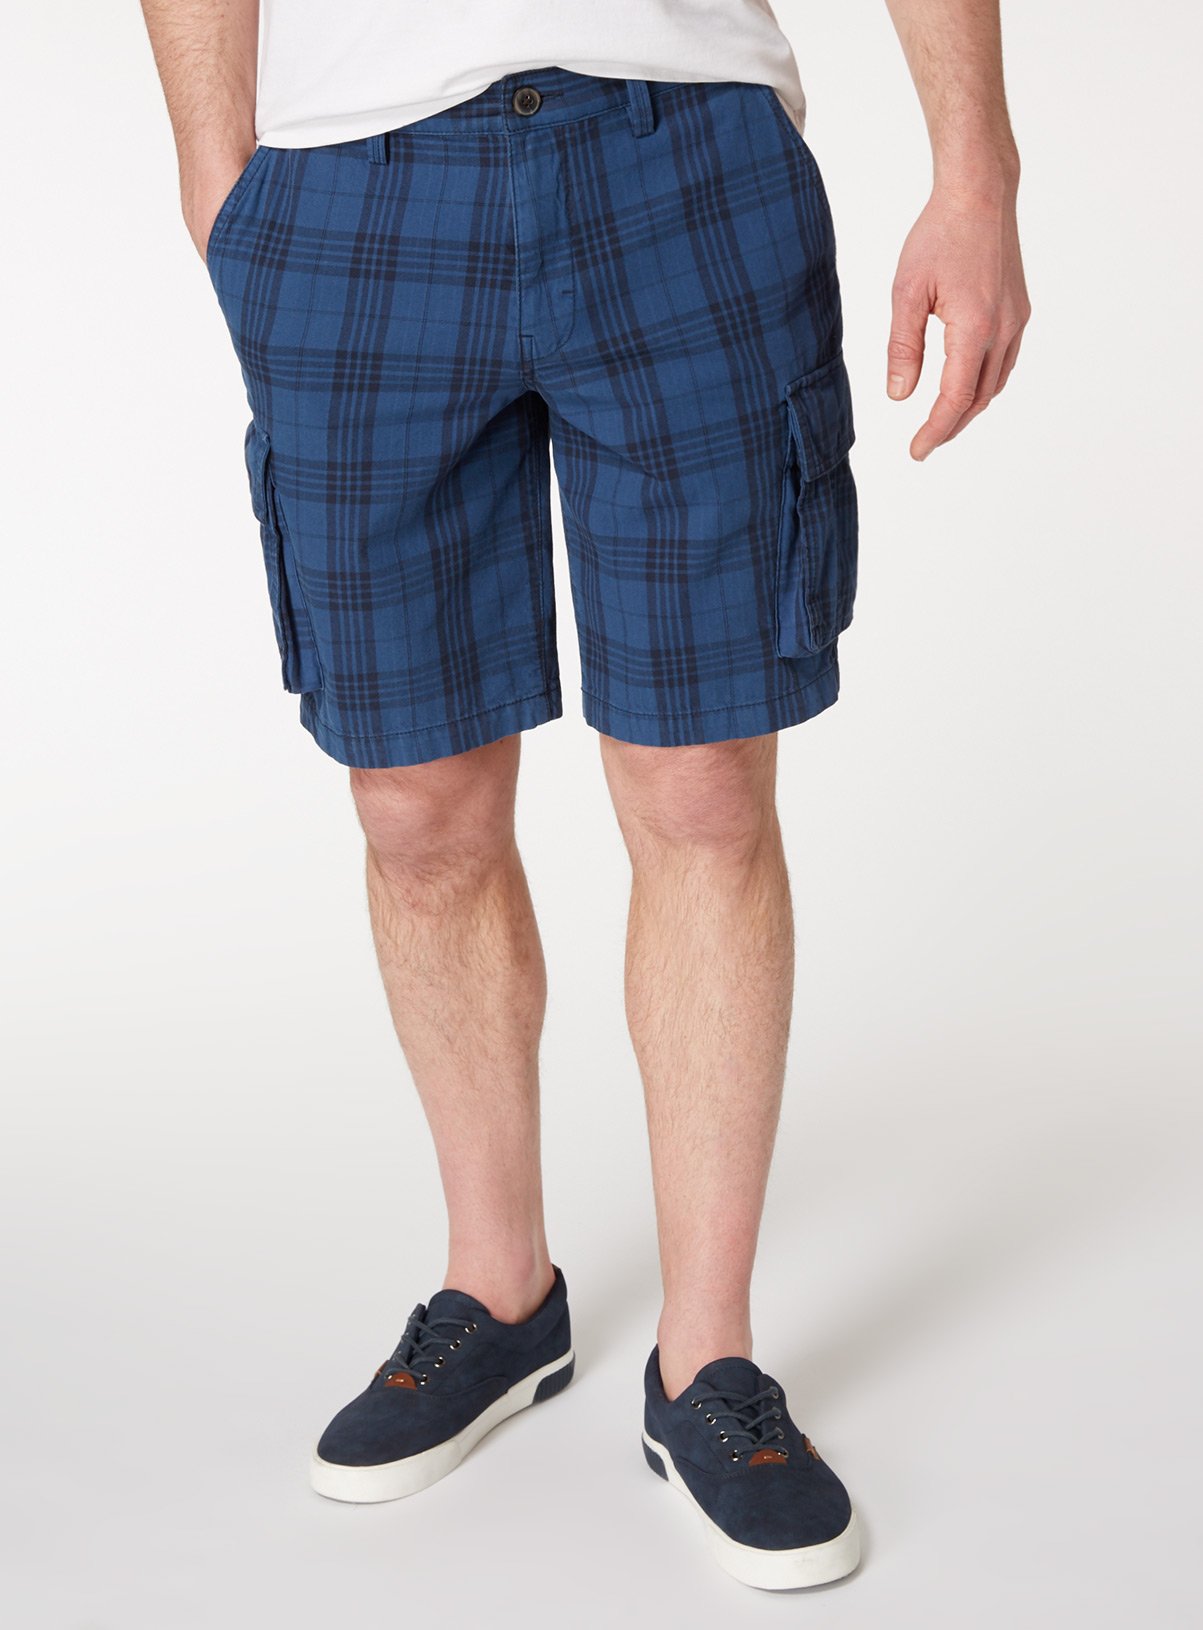 Check Twill Cargo Shorts Review